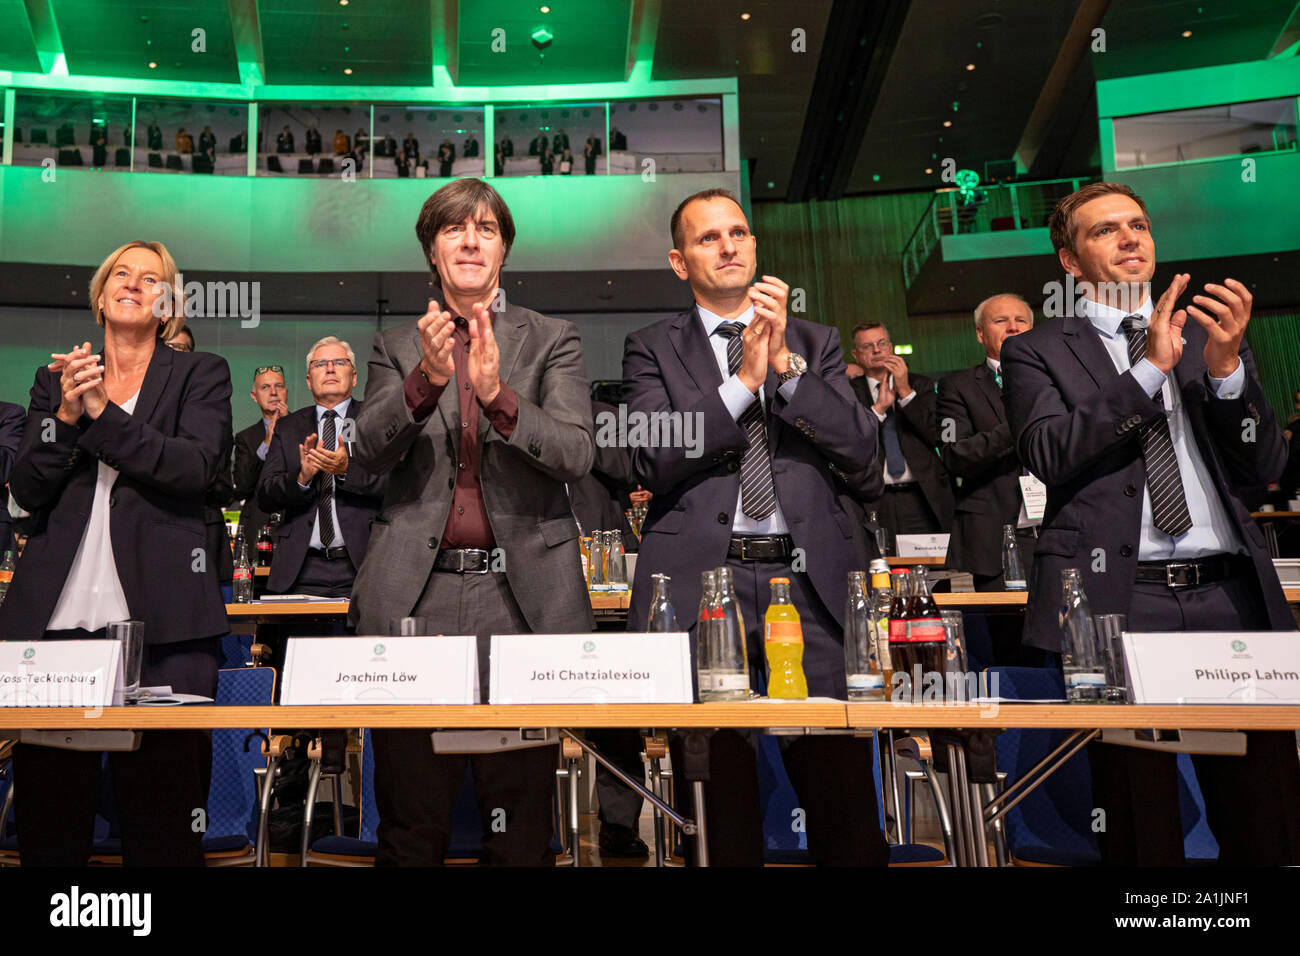 HANDOUT - 27 September 2019, Hessen, Frankfurt/Main: Applause and standing ovations for the honouring of Rauball by national coach of the women Martina Voss-Tecklenburg (l-r), national coach of the men Joachim Löw, sports director of national teams Panagiotis 'Joti' Chatzialexiou and Philipp Lahm at the 43rd ordinary DFB Bundestag in the Congress Center. The Bundestag of the German Football Association (DFB) is under the motto 'Bund für die Zukunft - Im Team den Fußball gestalten'. Photo: Thomas Boecker/DFB/dpa - ATTENTION: Only for editorial use and only with complete mention of the above cre Stock Photo